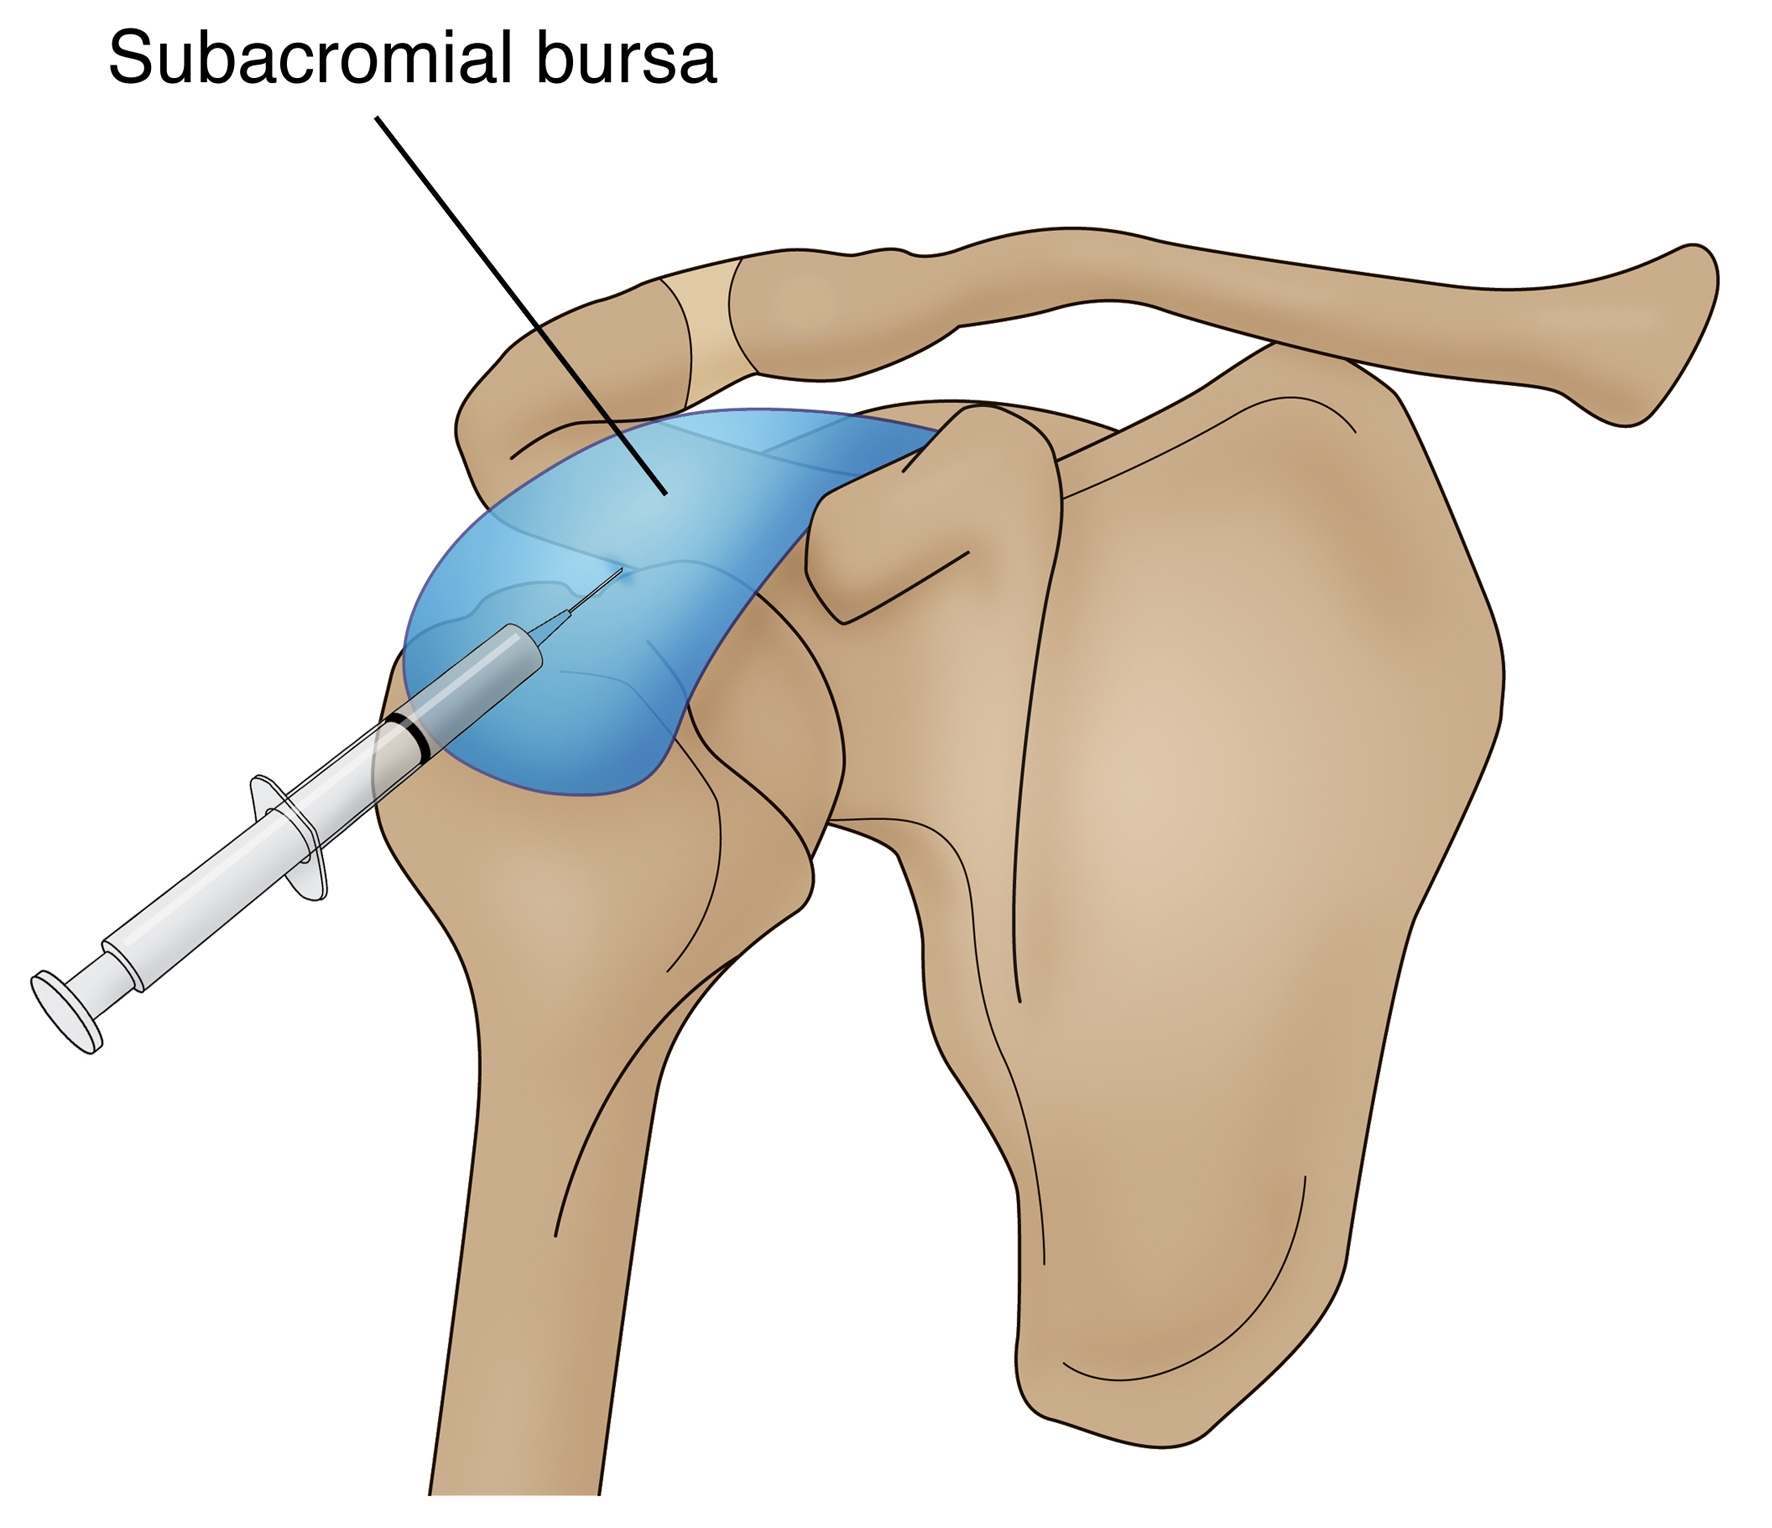 Figure 3: Injection piercing the subacromial bursa within the subacromial space